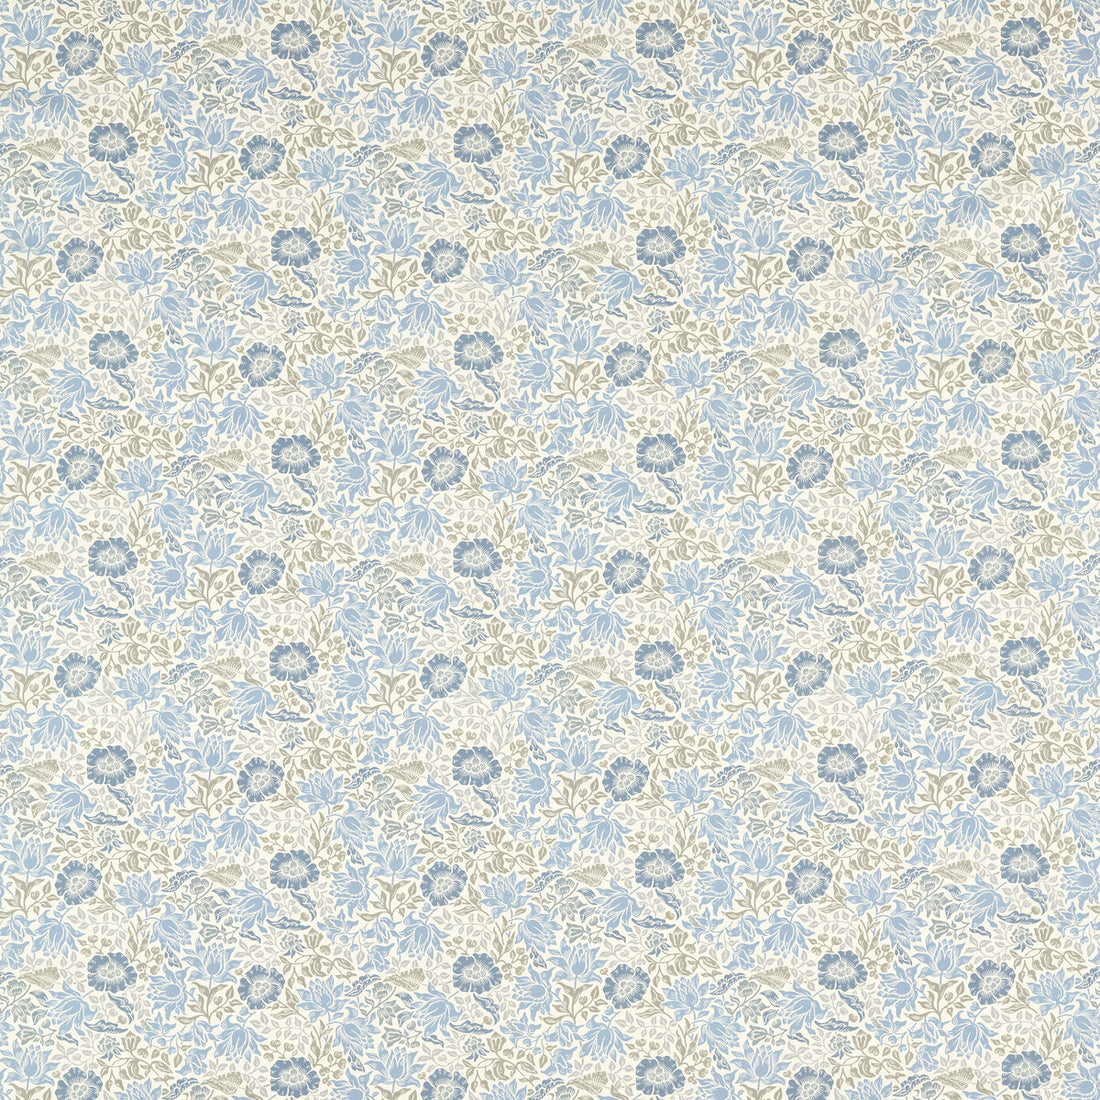 Mallow fabric in denim/ivory color - pattern F1680/03.CAC.0 - by Clarke And Clarke in the Clarke &amp; Clarke William Morris Designs collection